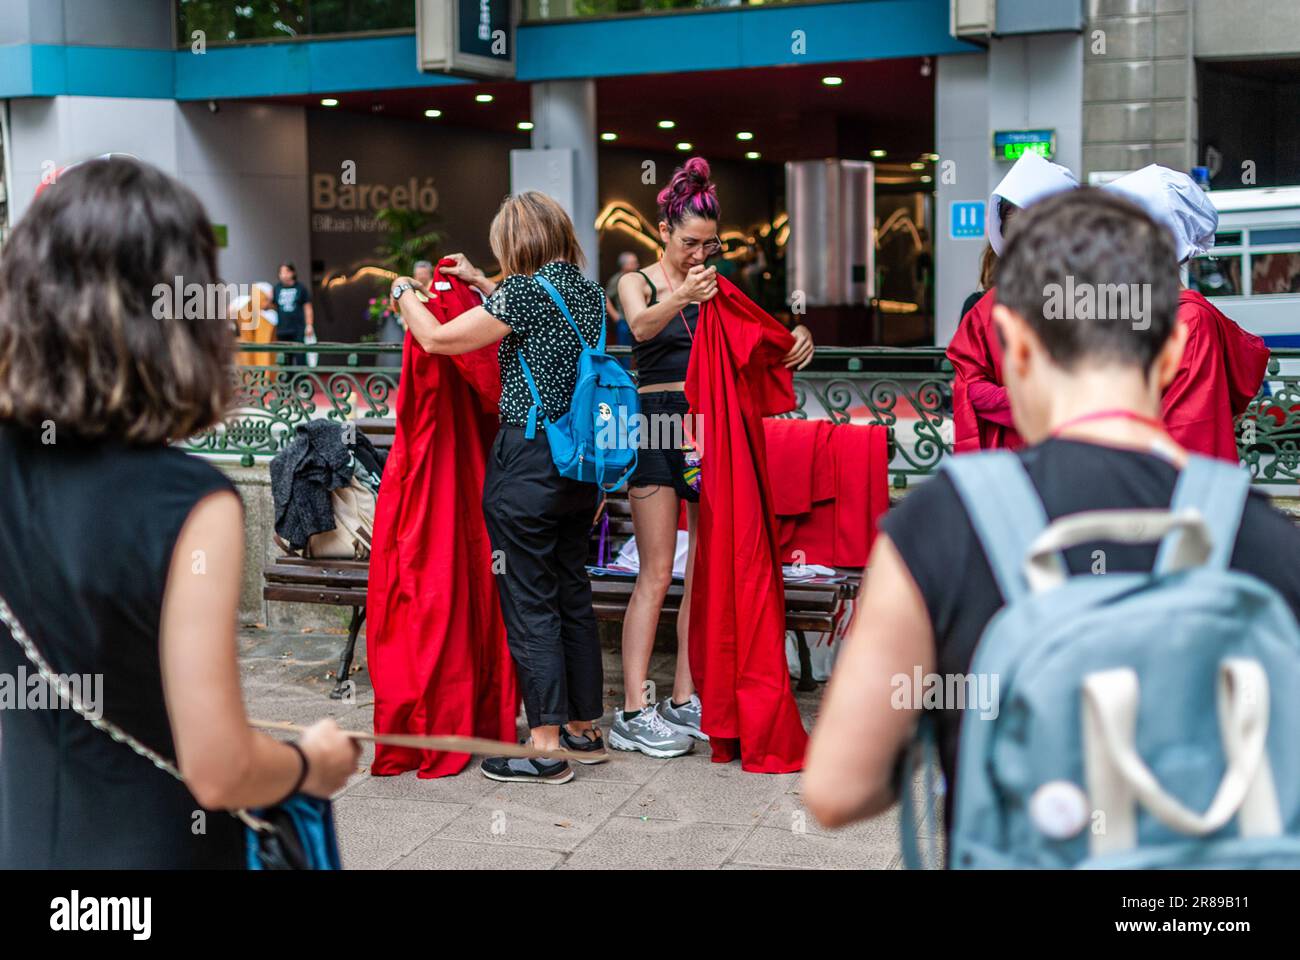 Radical feminist activists dressed in a costume from the series 'The Handmaid's Tale' participate in a demonstration against surrogacy. Stock Photo